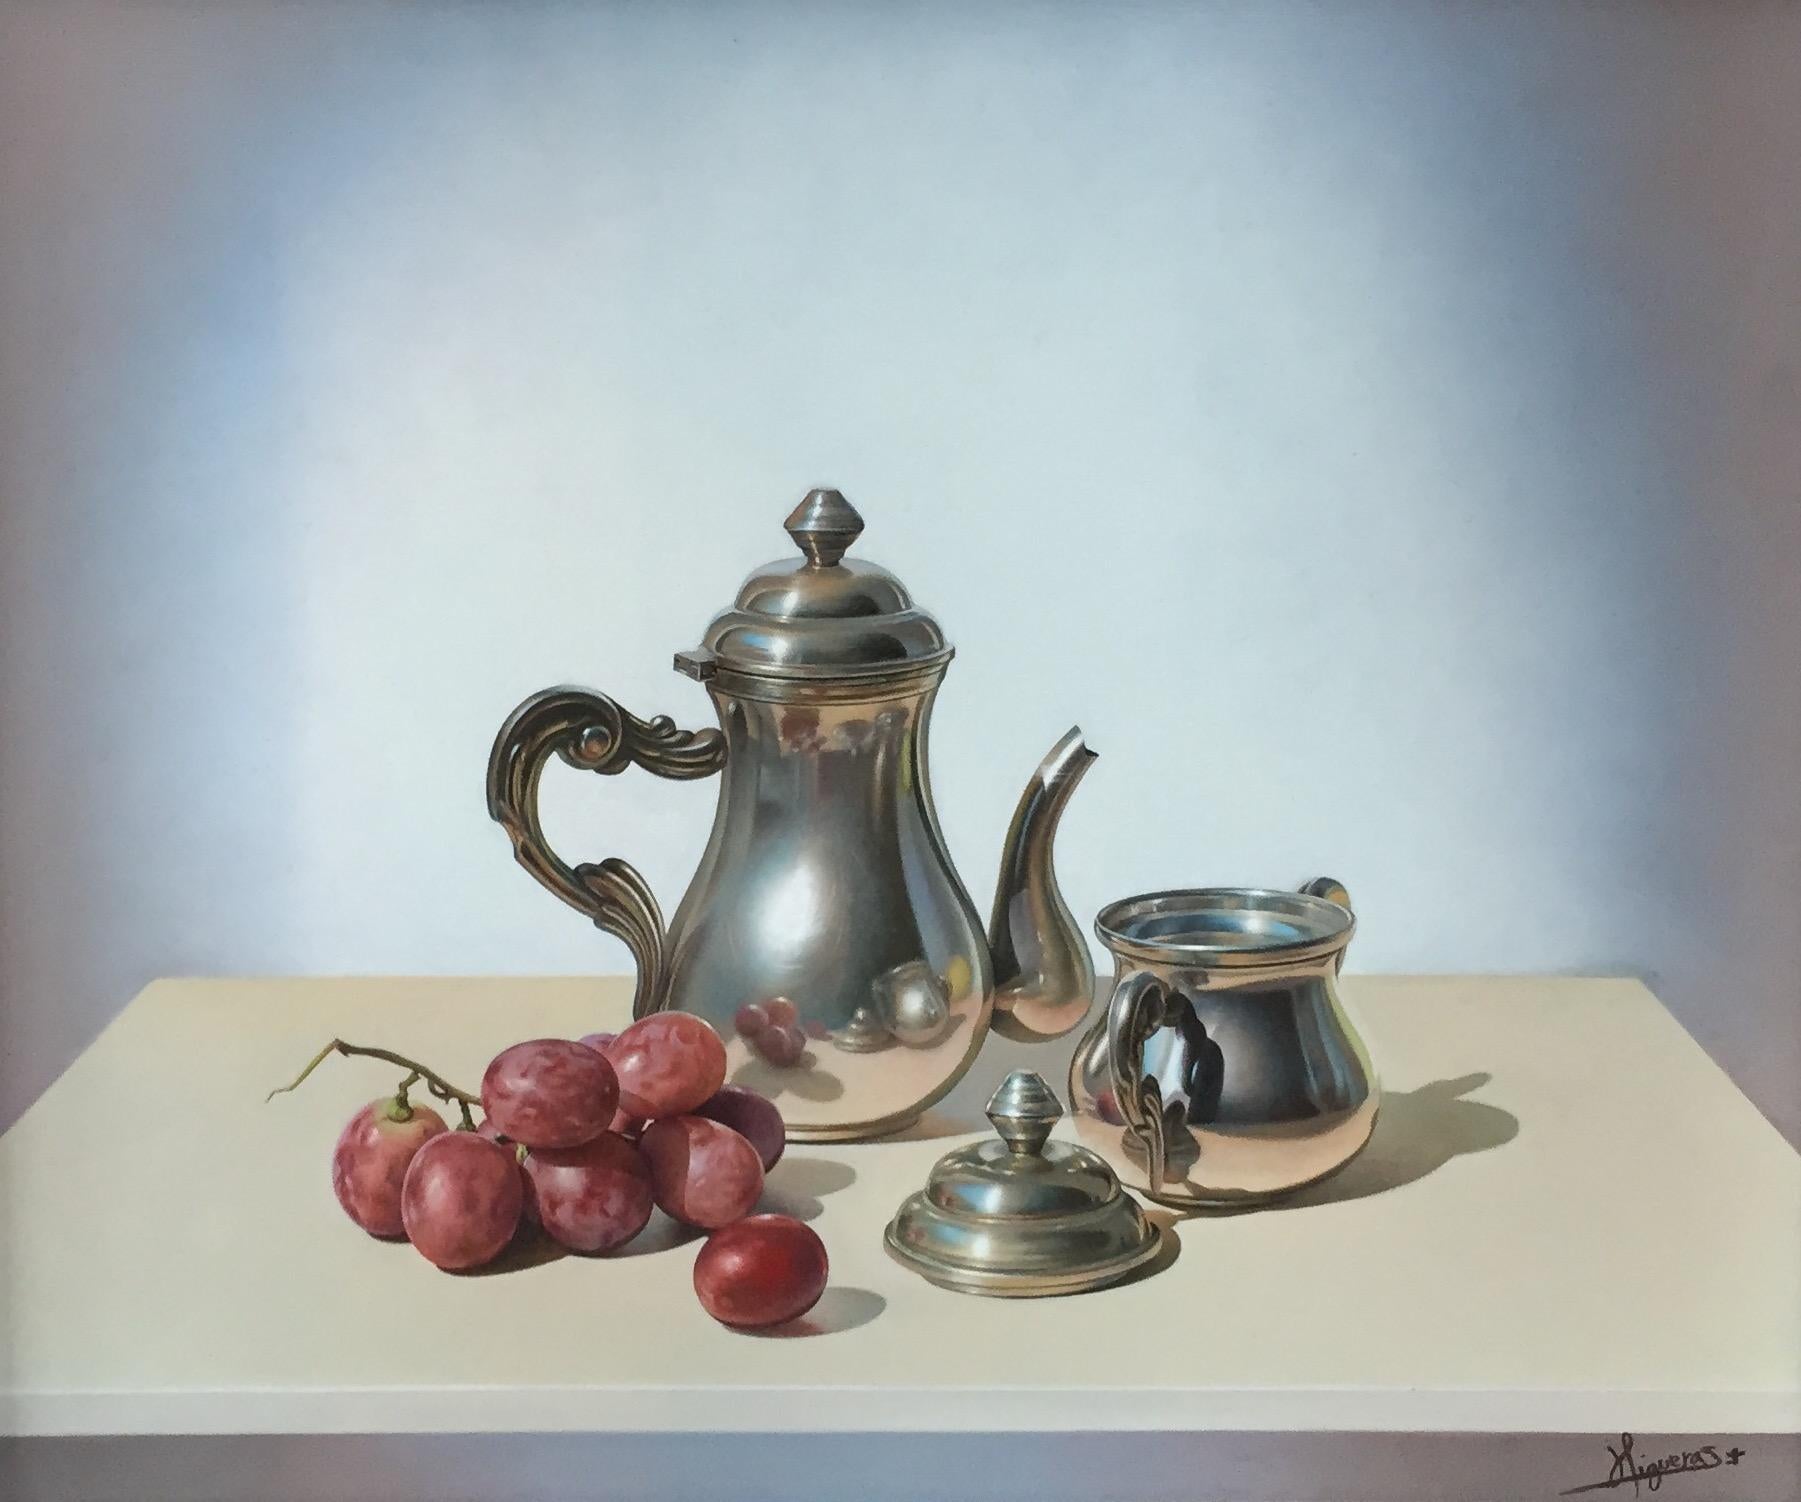 'Still Life with Grapes' Contemporary painting of Silverware, Coffee pot & Fruit - Painting by Manolo Higueras